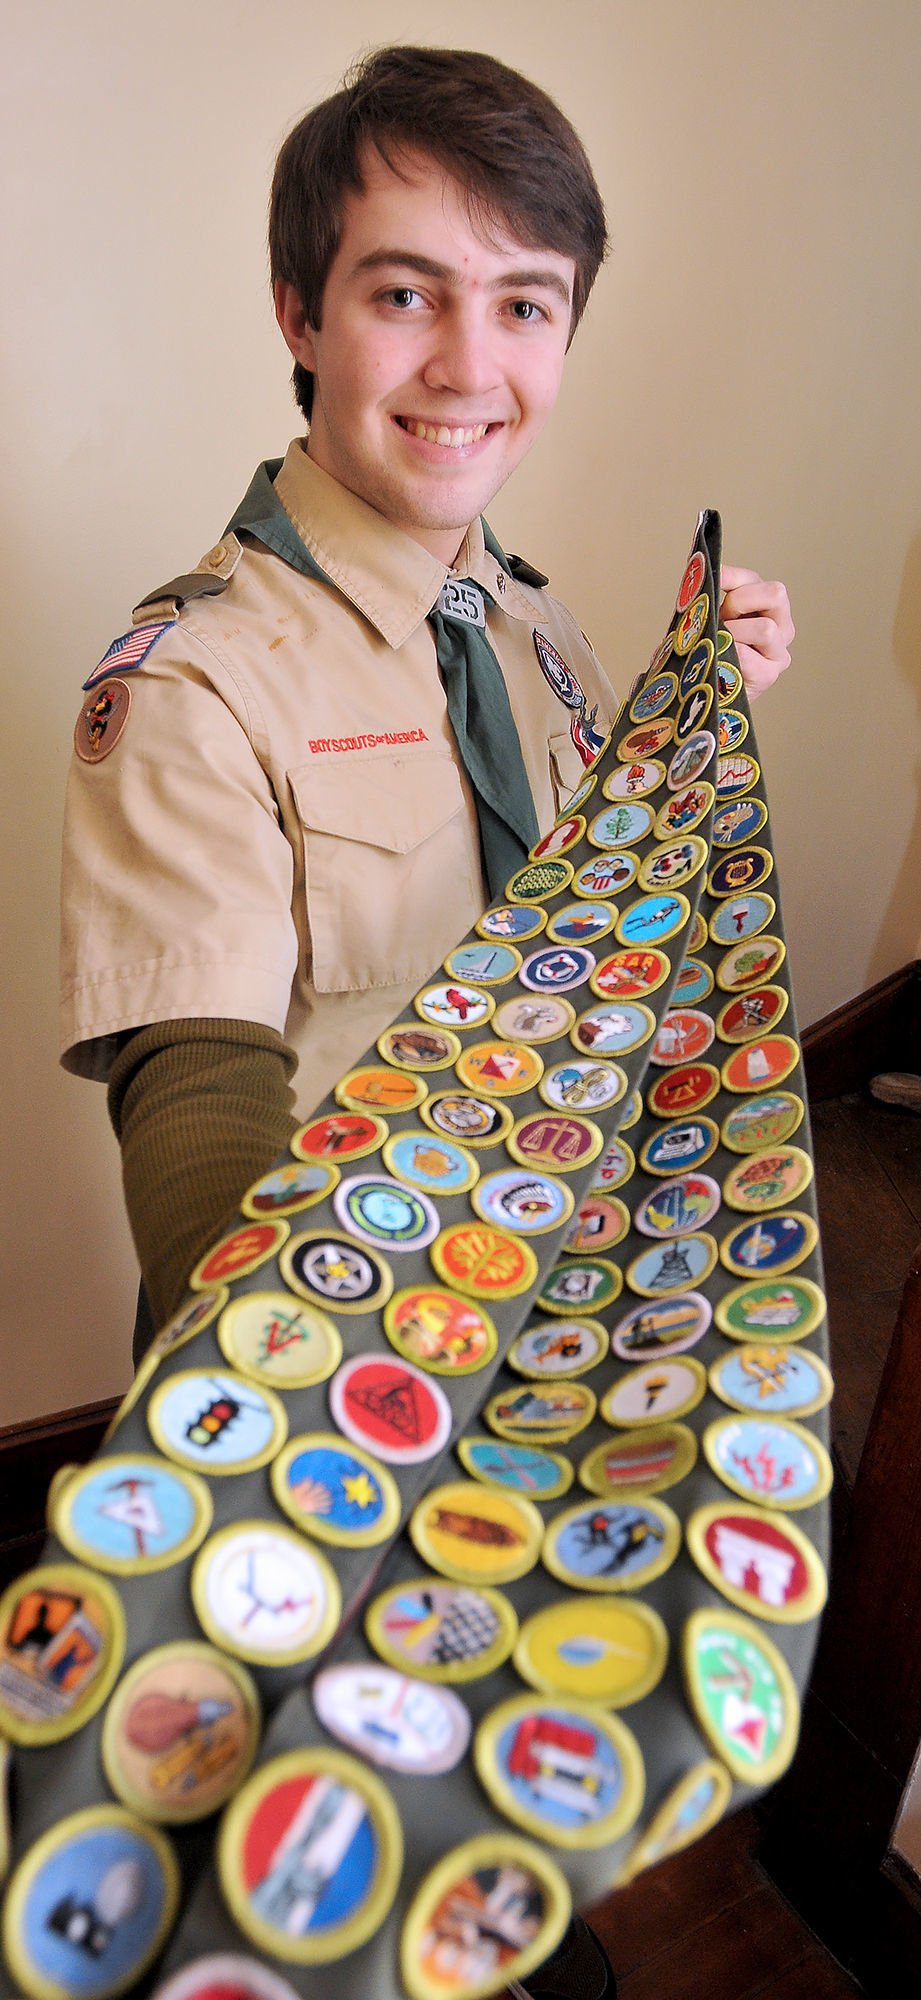 North Attleboro Teen Earns All 138 Boy Scout Merit Badges Local News Thesunchronicle Com,Gas Dryer Vs Electric Dryer